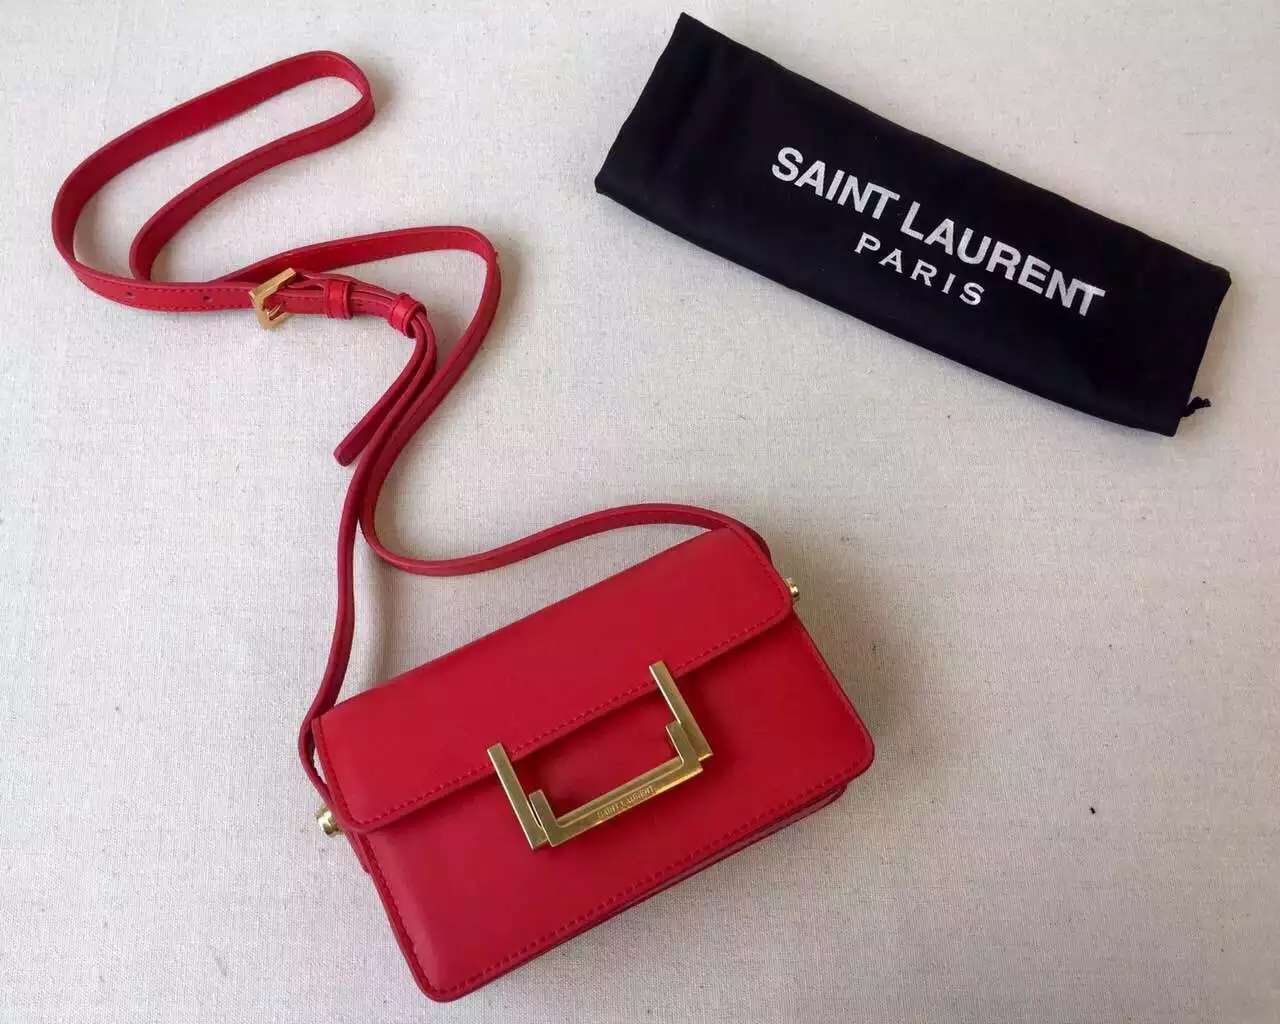 2015 Cheap YSL Out-Sale with Free Shipping-Saint Laurent Classic Small Lulu Leather Bag in Red Calfskin Leather